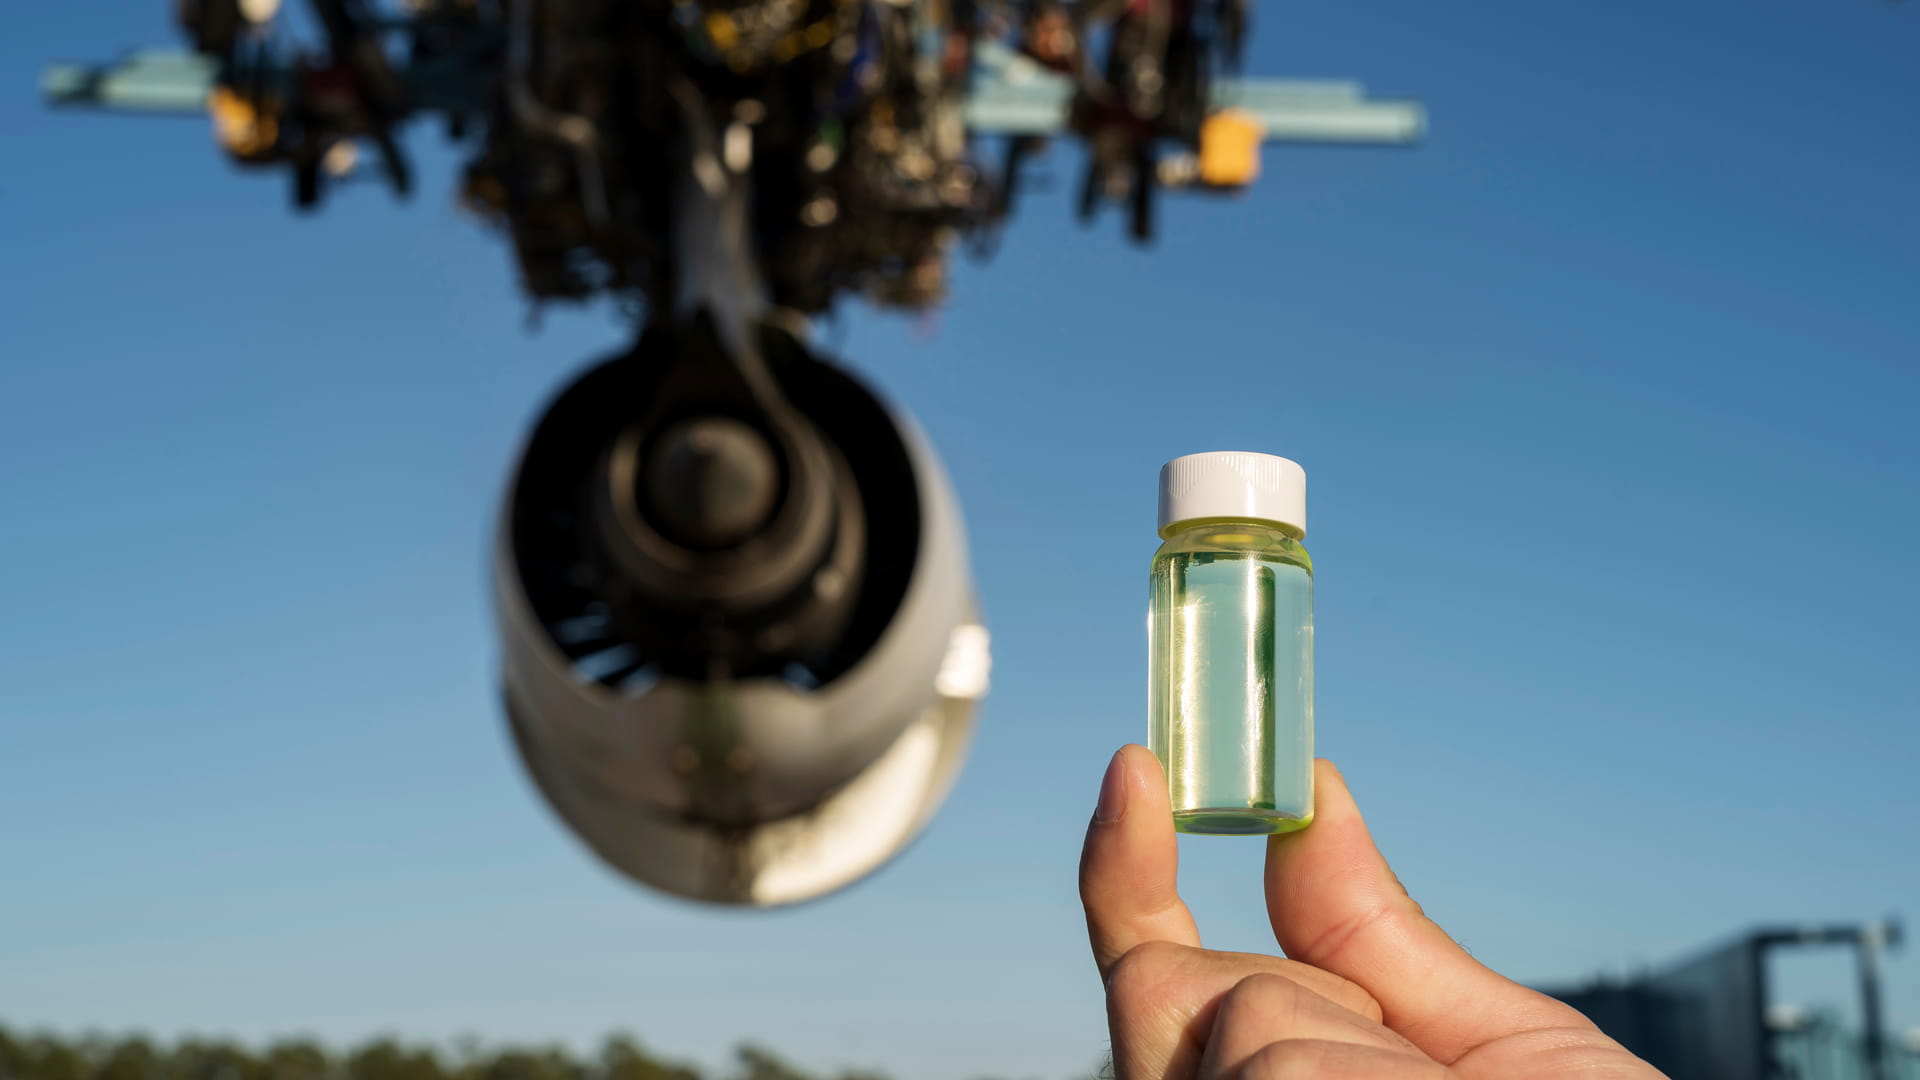 Hand holding a vial containing an alternate aviation fuel source